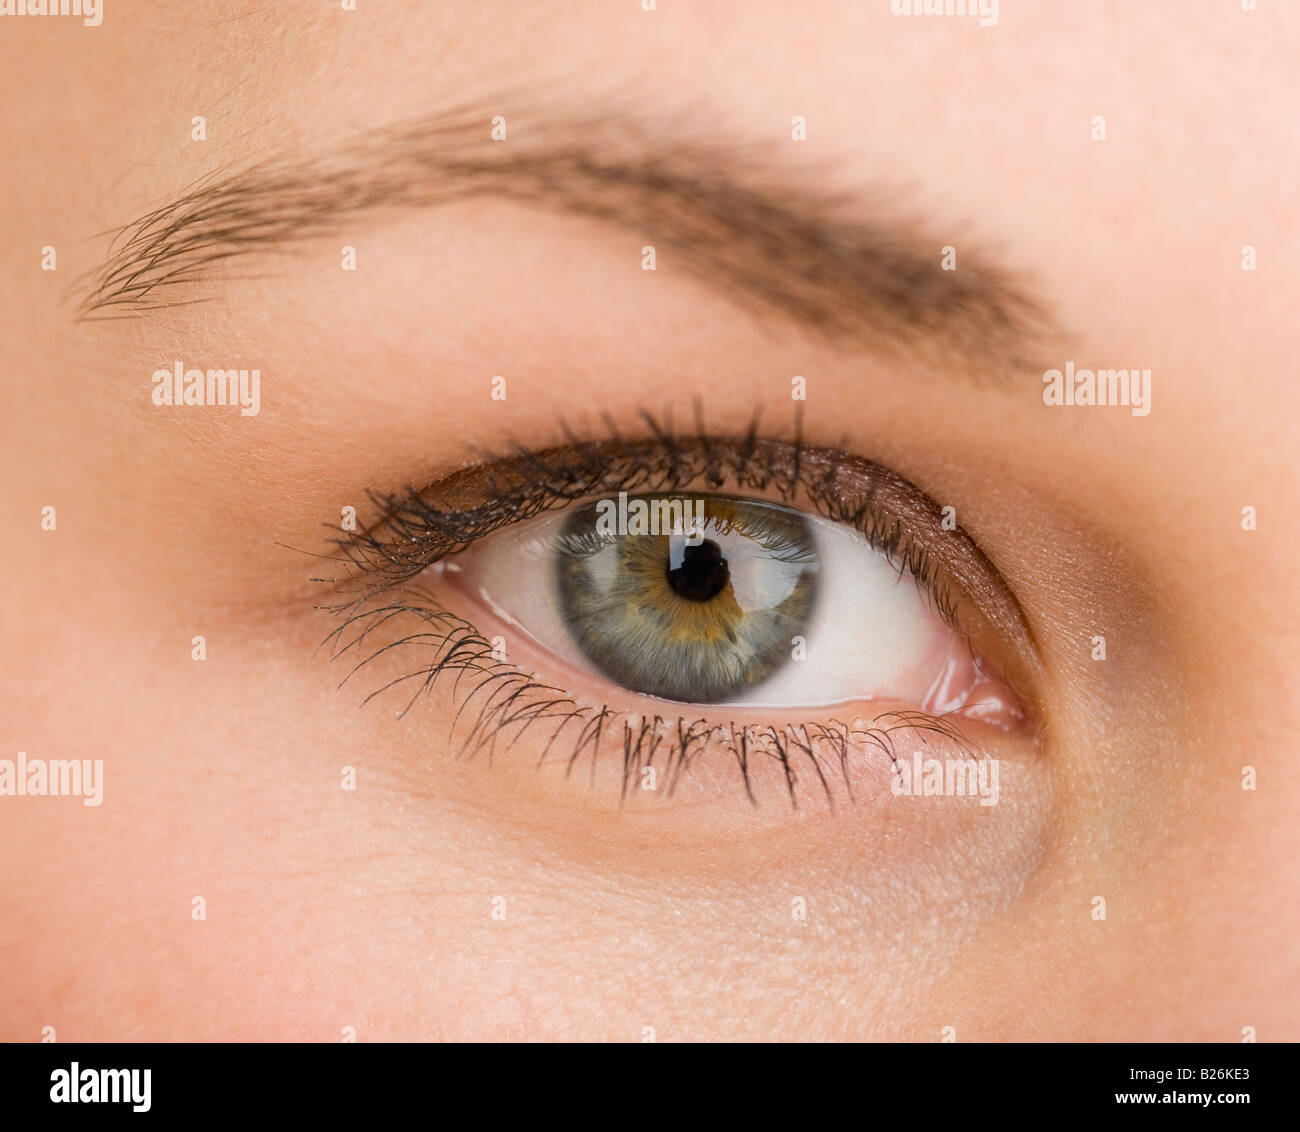 Extreme close up of woman's eye Banque D'Images